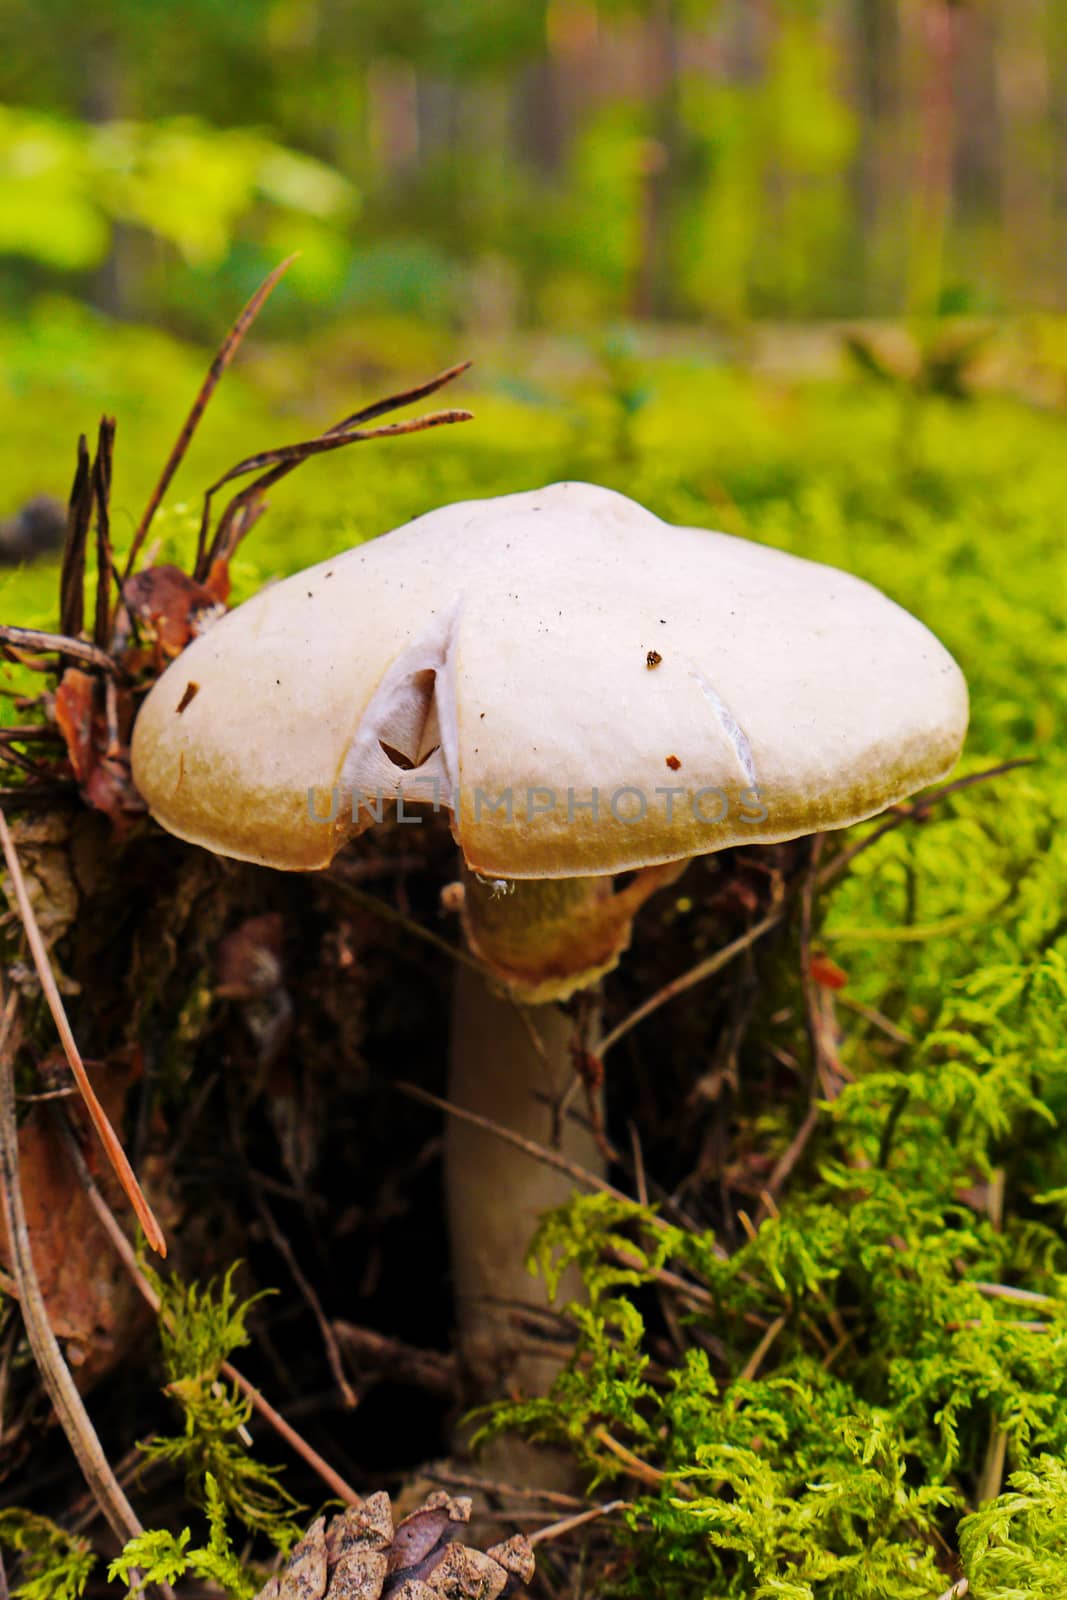 The most dangerous and poisonous pale toadstool lurking in the woods among the moss